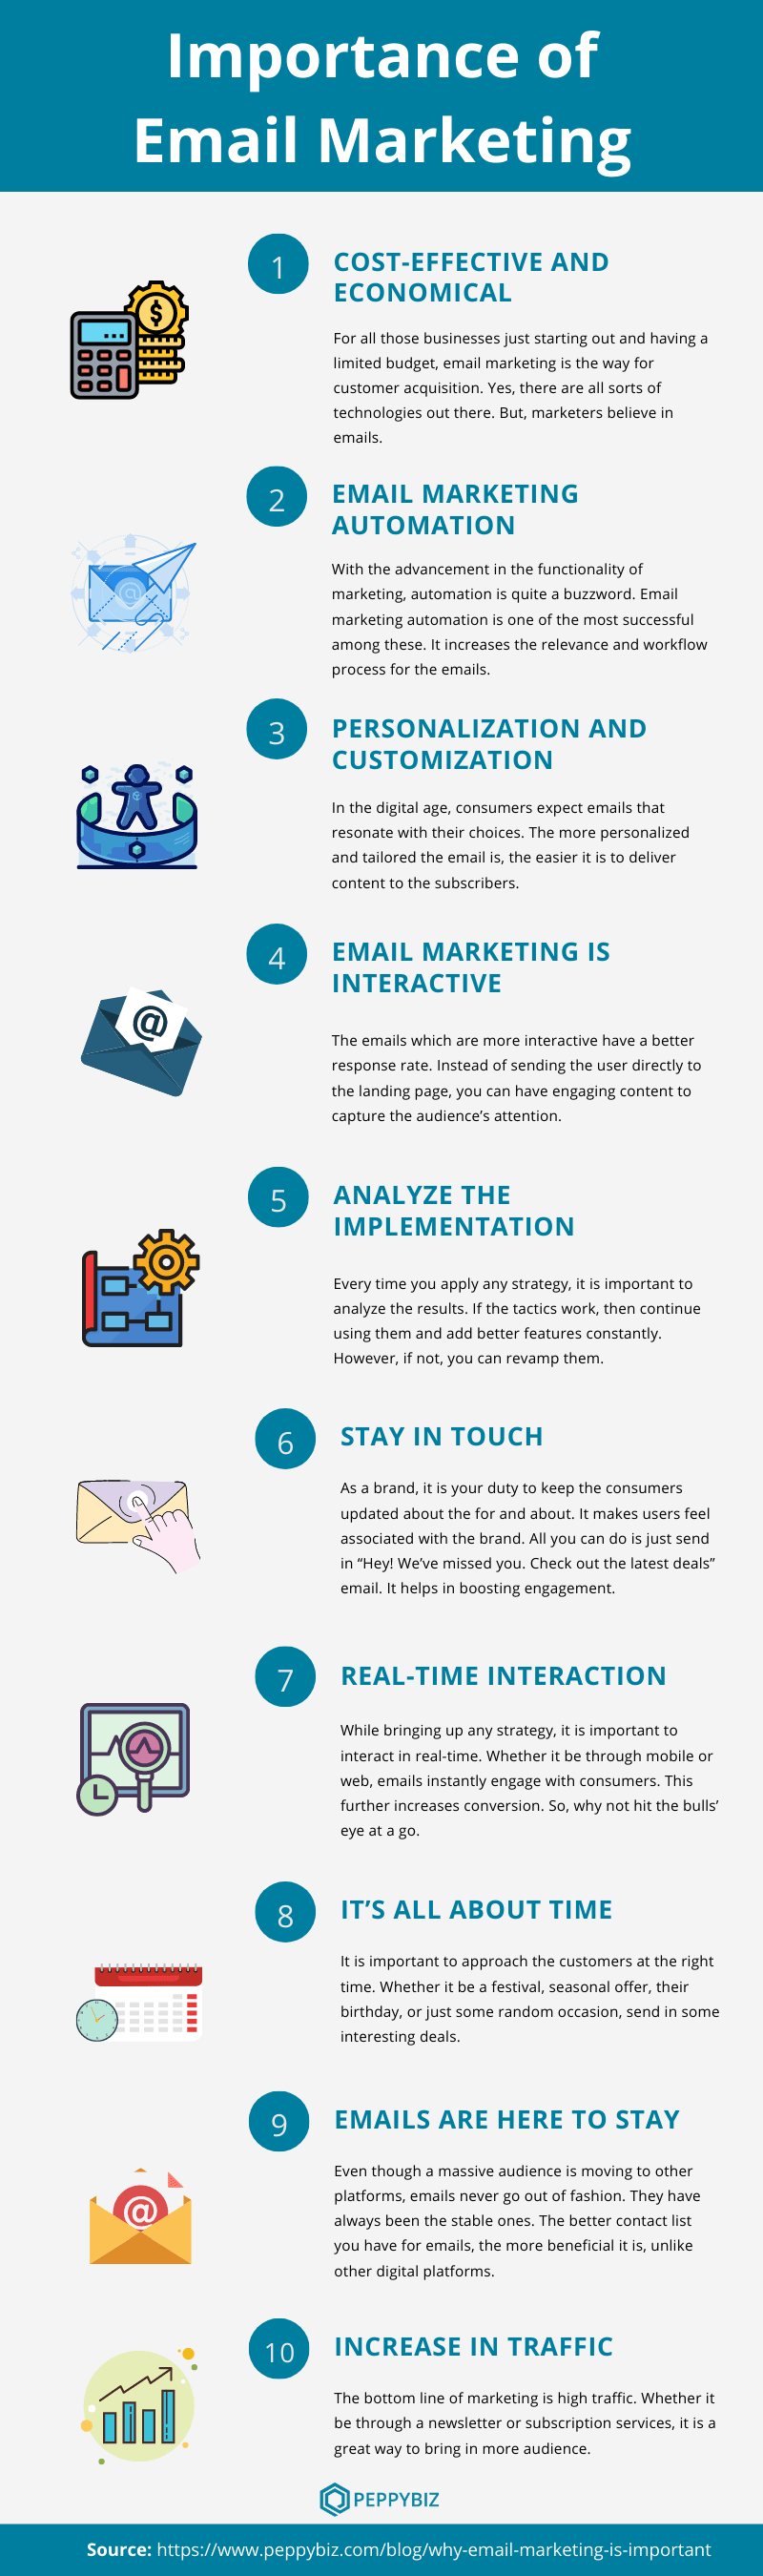 Why Email Marketing Is Important